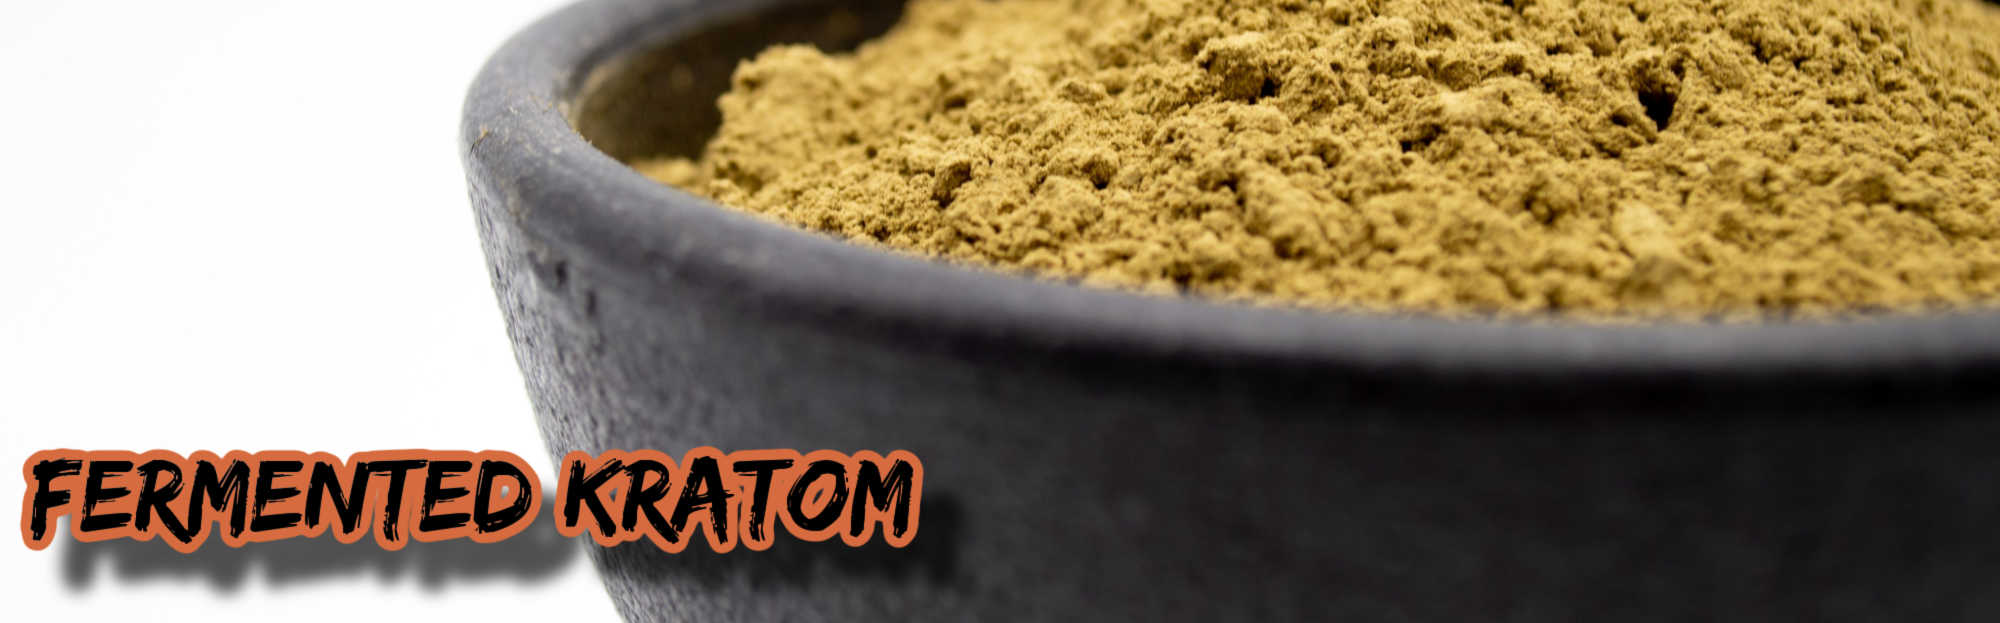 What is Fermented Kratom? – Safety, Usage, and Effects